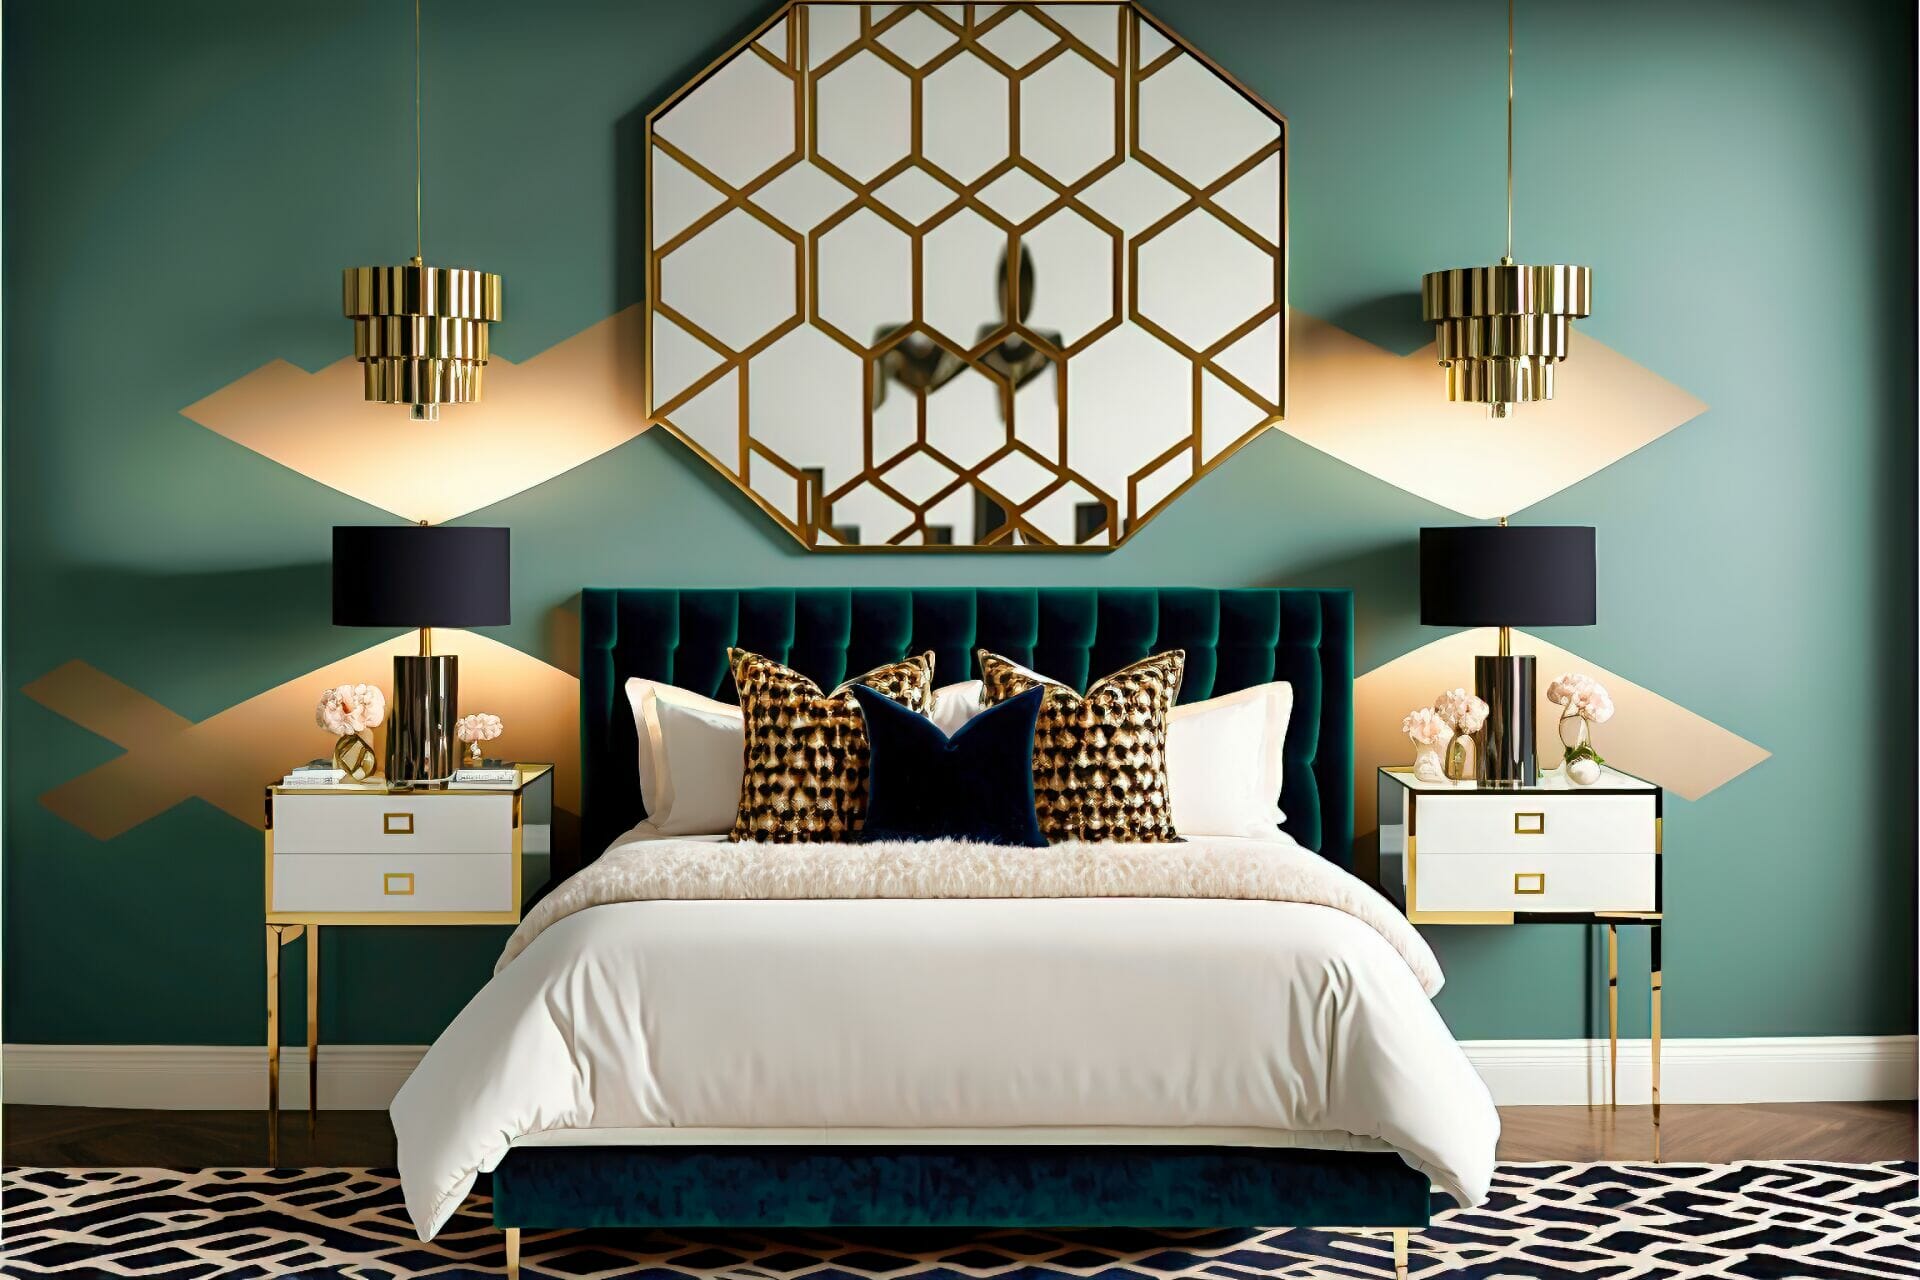 Mid-Century Modern Bedroom – A Glamourous Modern Bedroom Featuring A Velvet Bed Frame With Bold Geometric Pattern, A Mirrored Dresser, And A Textured Wall Hanging.